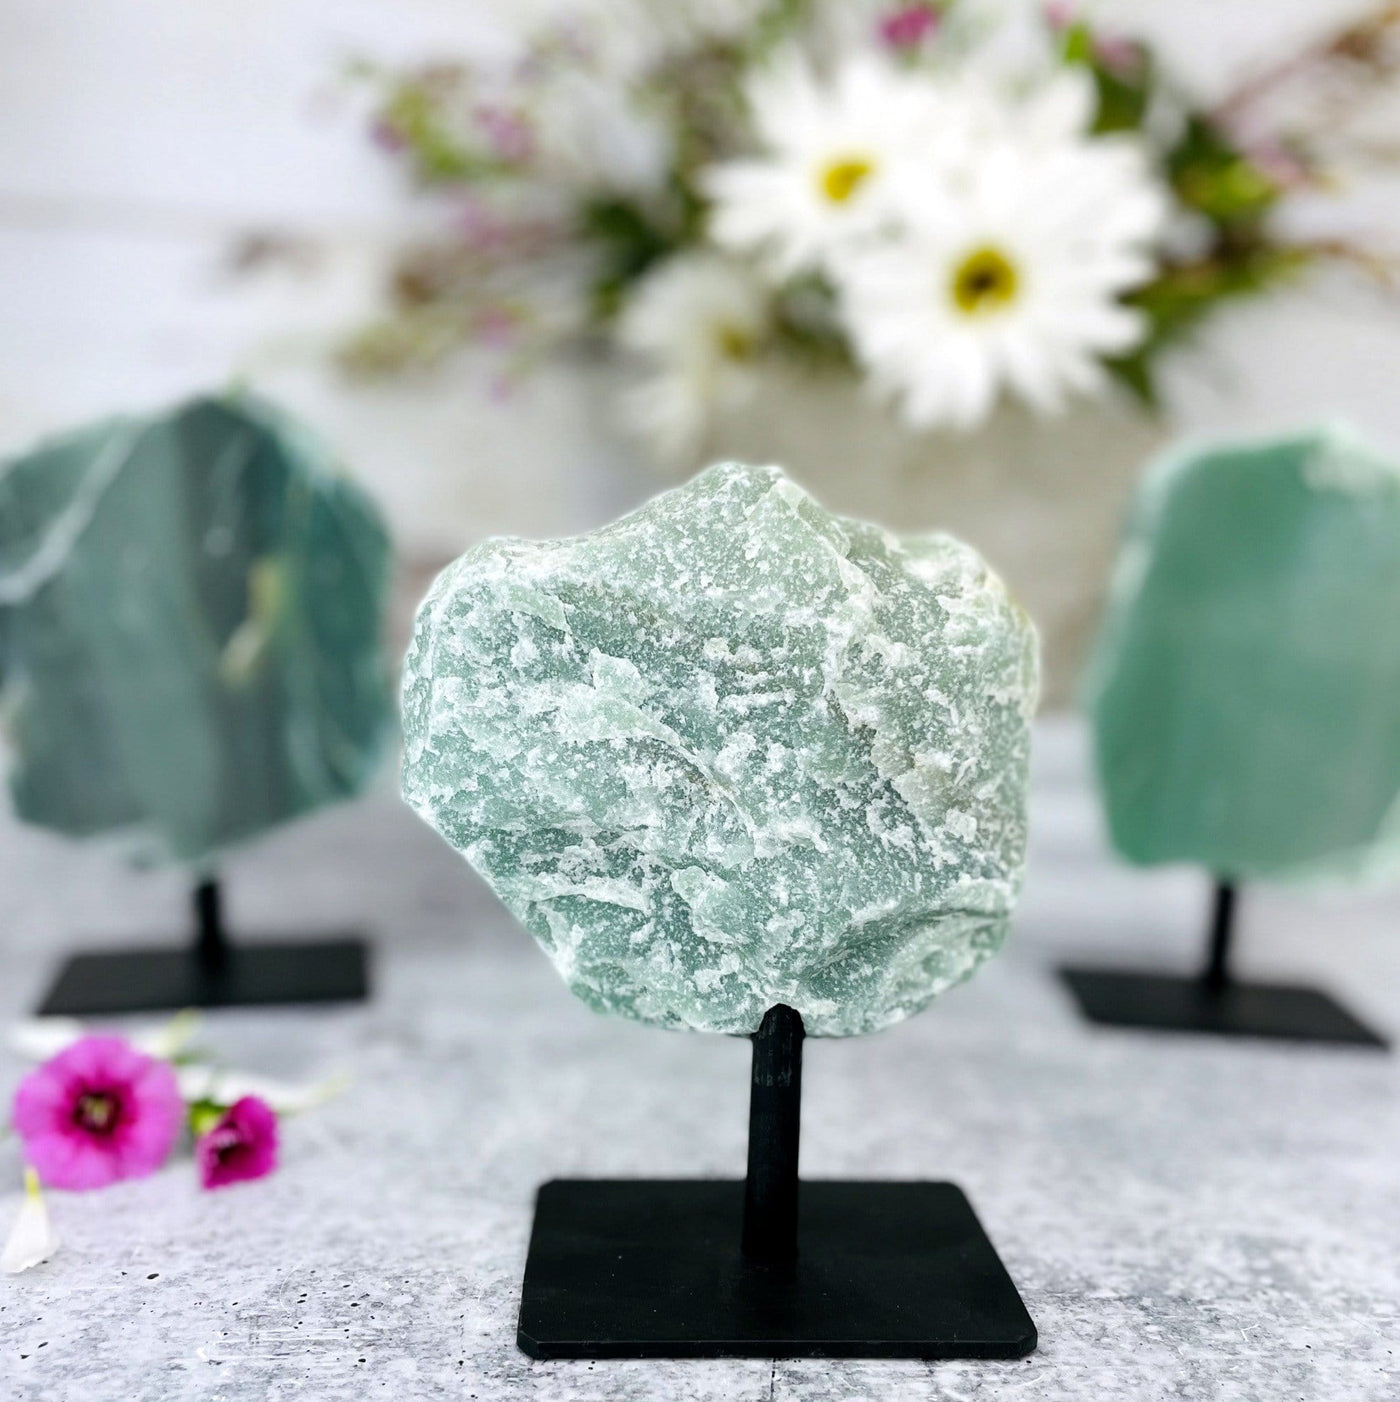 back view of green quartz on metal stand with 2 others blurred in the background